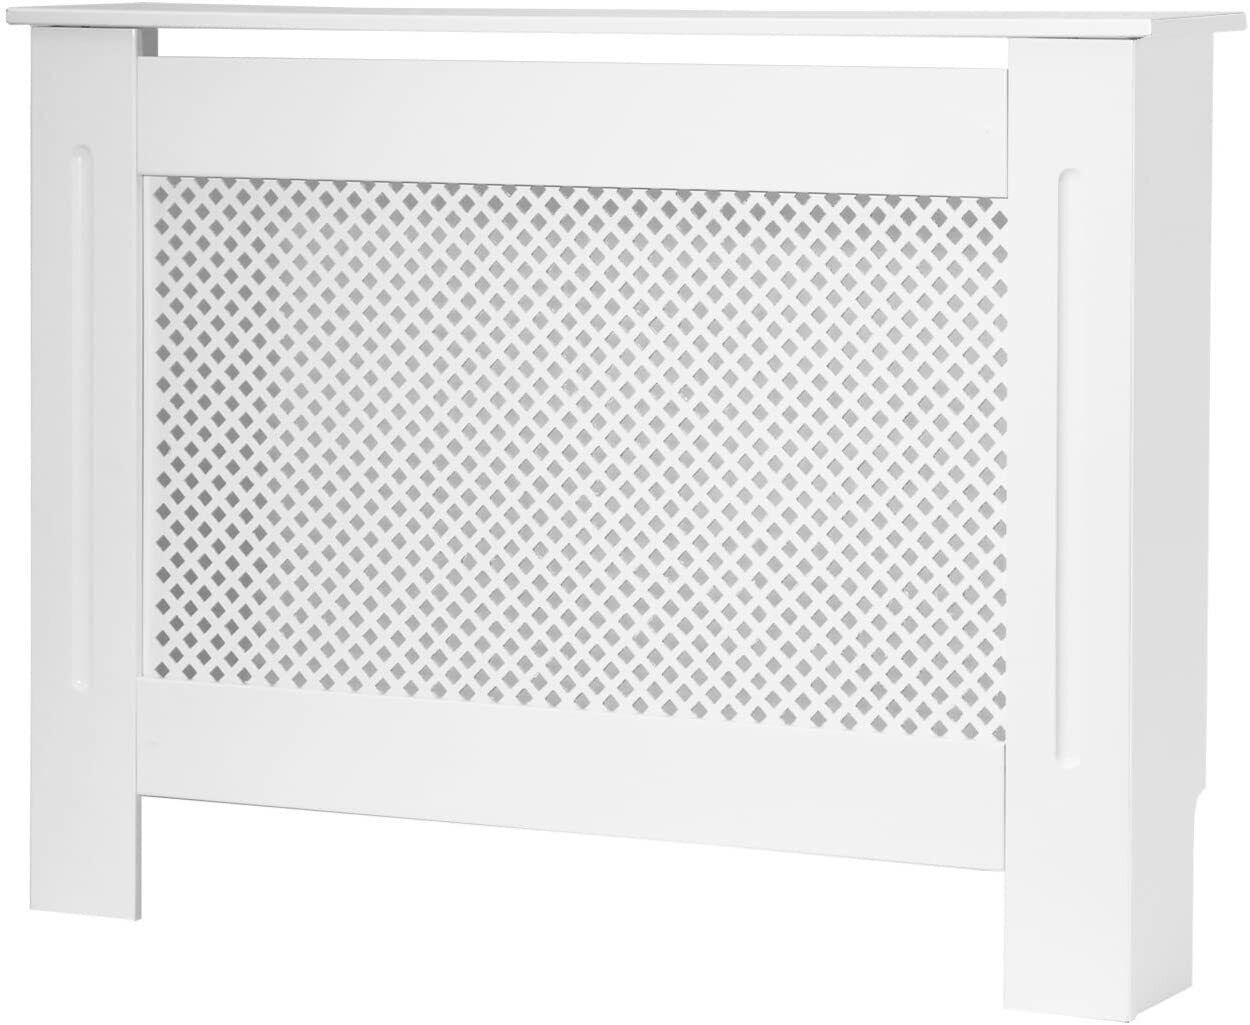 Modern Radiator Cover Wall Cabinet Wood MDF Grill Shelf Traditional Furniture UK